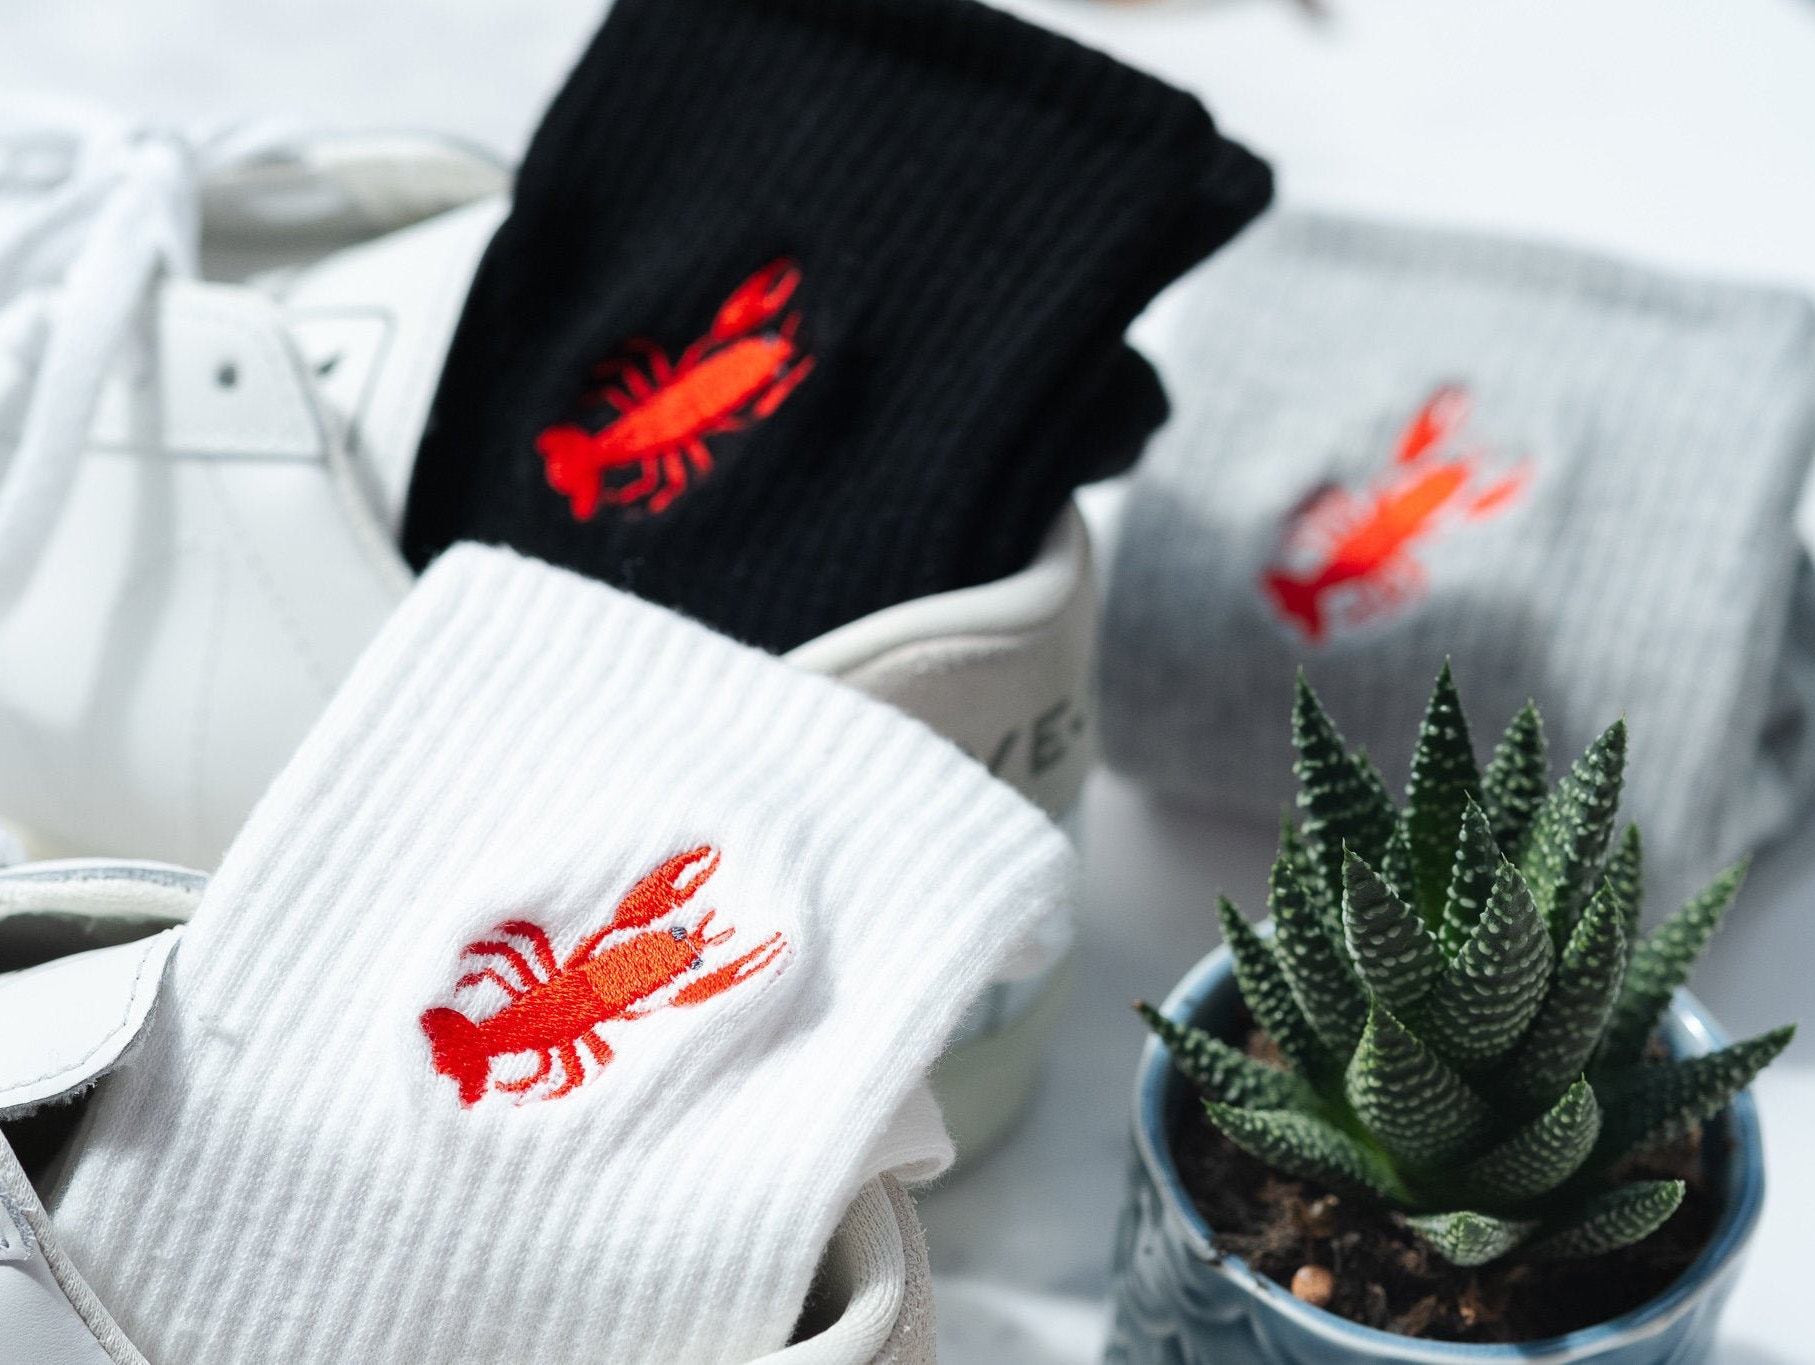 Lobster Socks - Embroidered Unisex Crew Sock | UK Made To Order Happy, Cute, Couples, Skater, Casual Socks Great Gift Idea For Him & Her